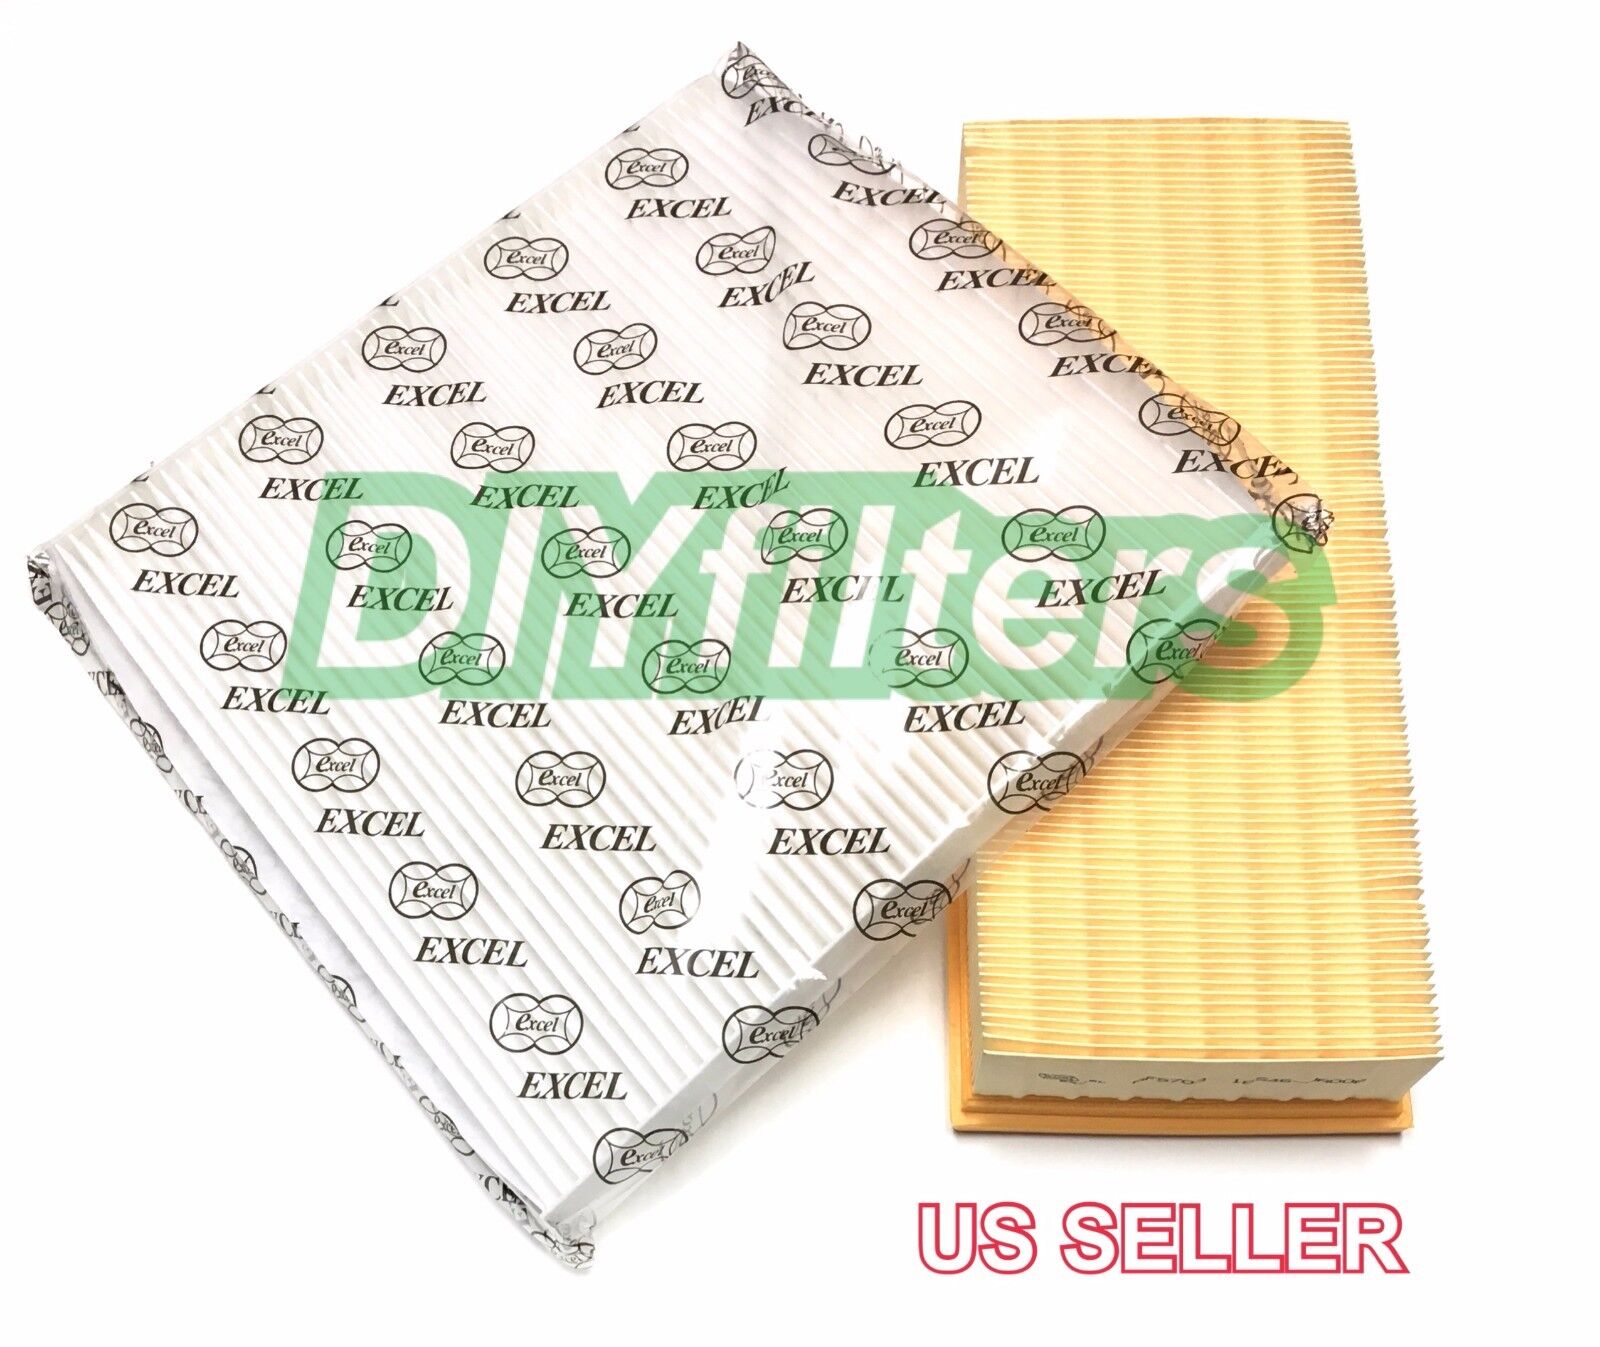 Engine & Cabin Air Filter For Nissan Altima 07-12 4cyl Altima Coupe 13 US Seller